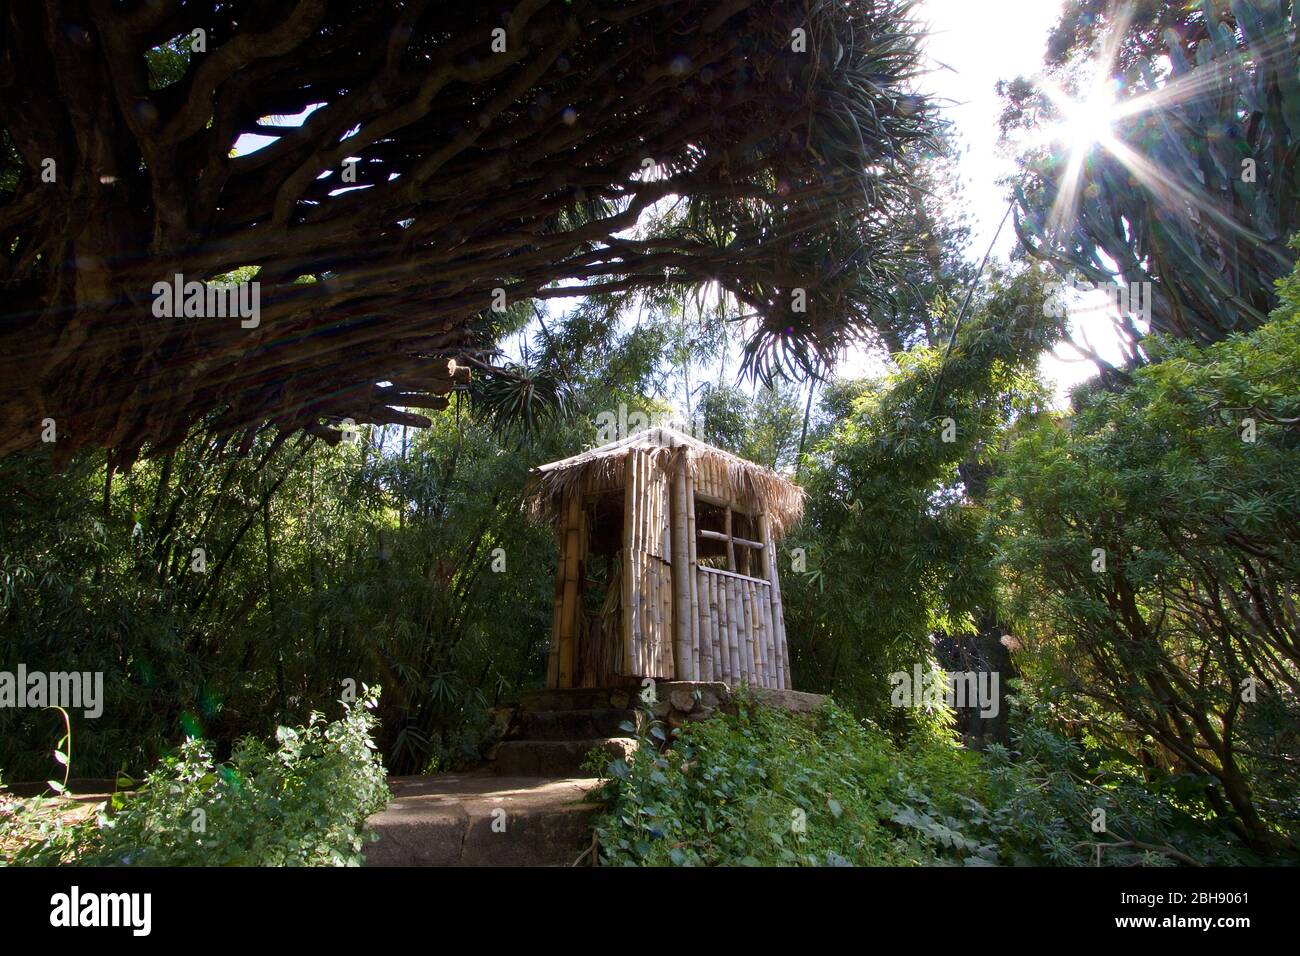 Palermo, old town, botanical garden, wooden hut in the middle of a small forest Stock Photo